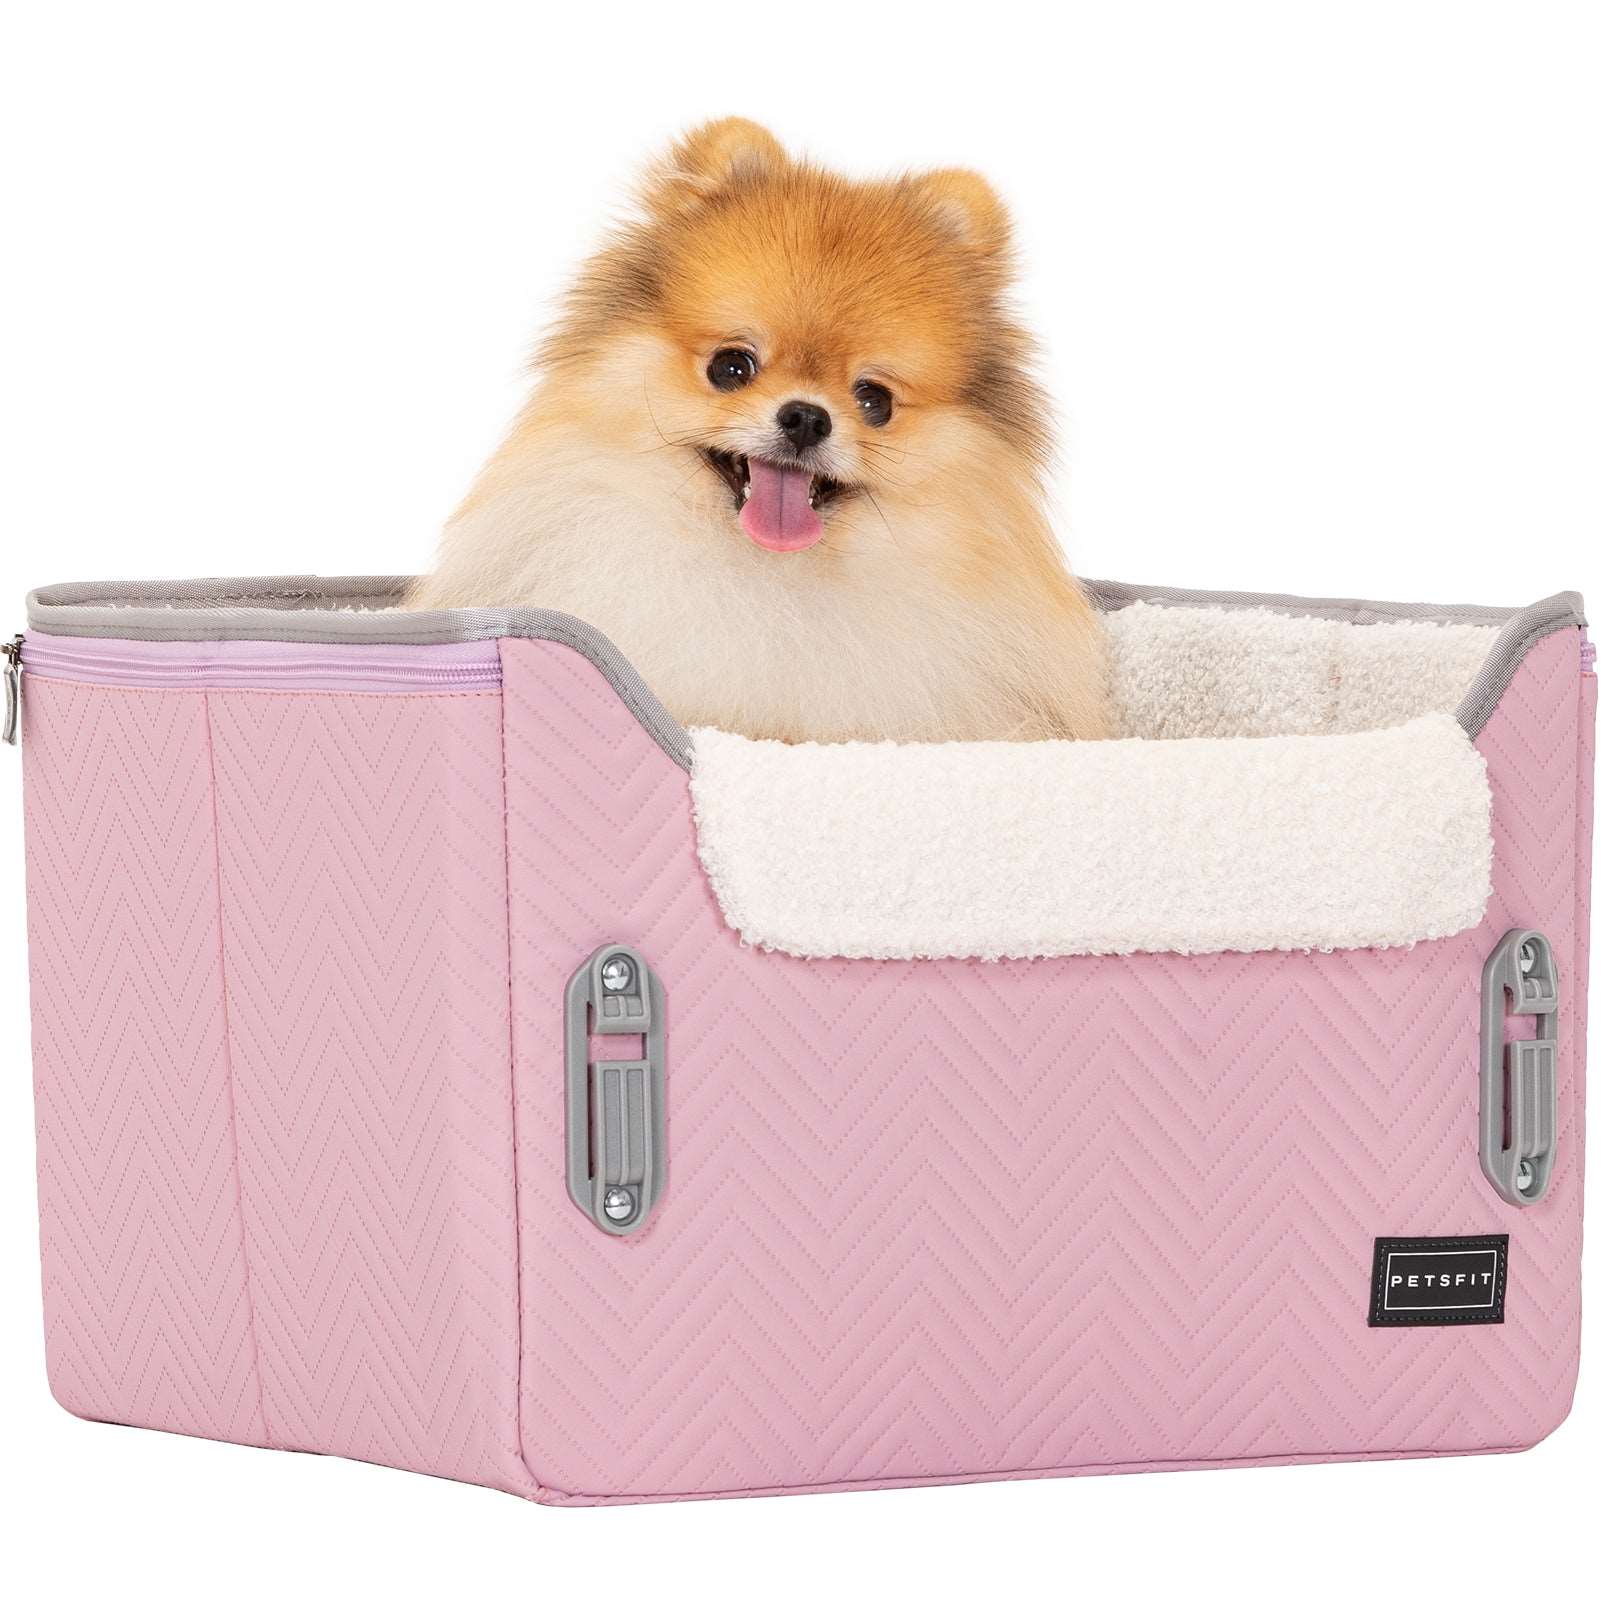 PETSFIT-Dog-Car-Seats-for-Small-Dogs-Puppy-Stable-Pet-Car-Seat-13